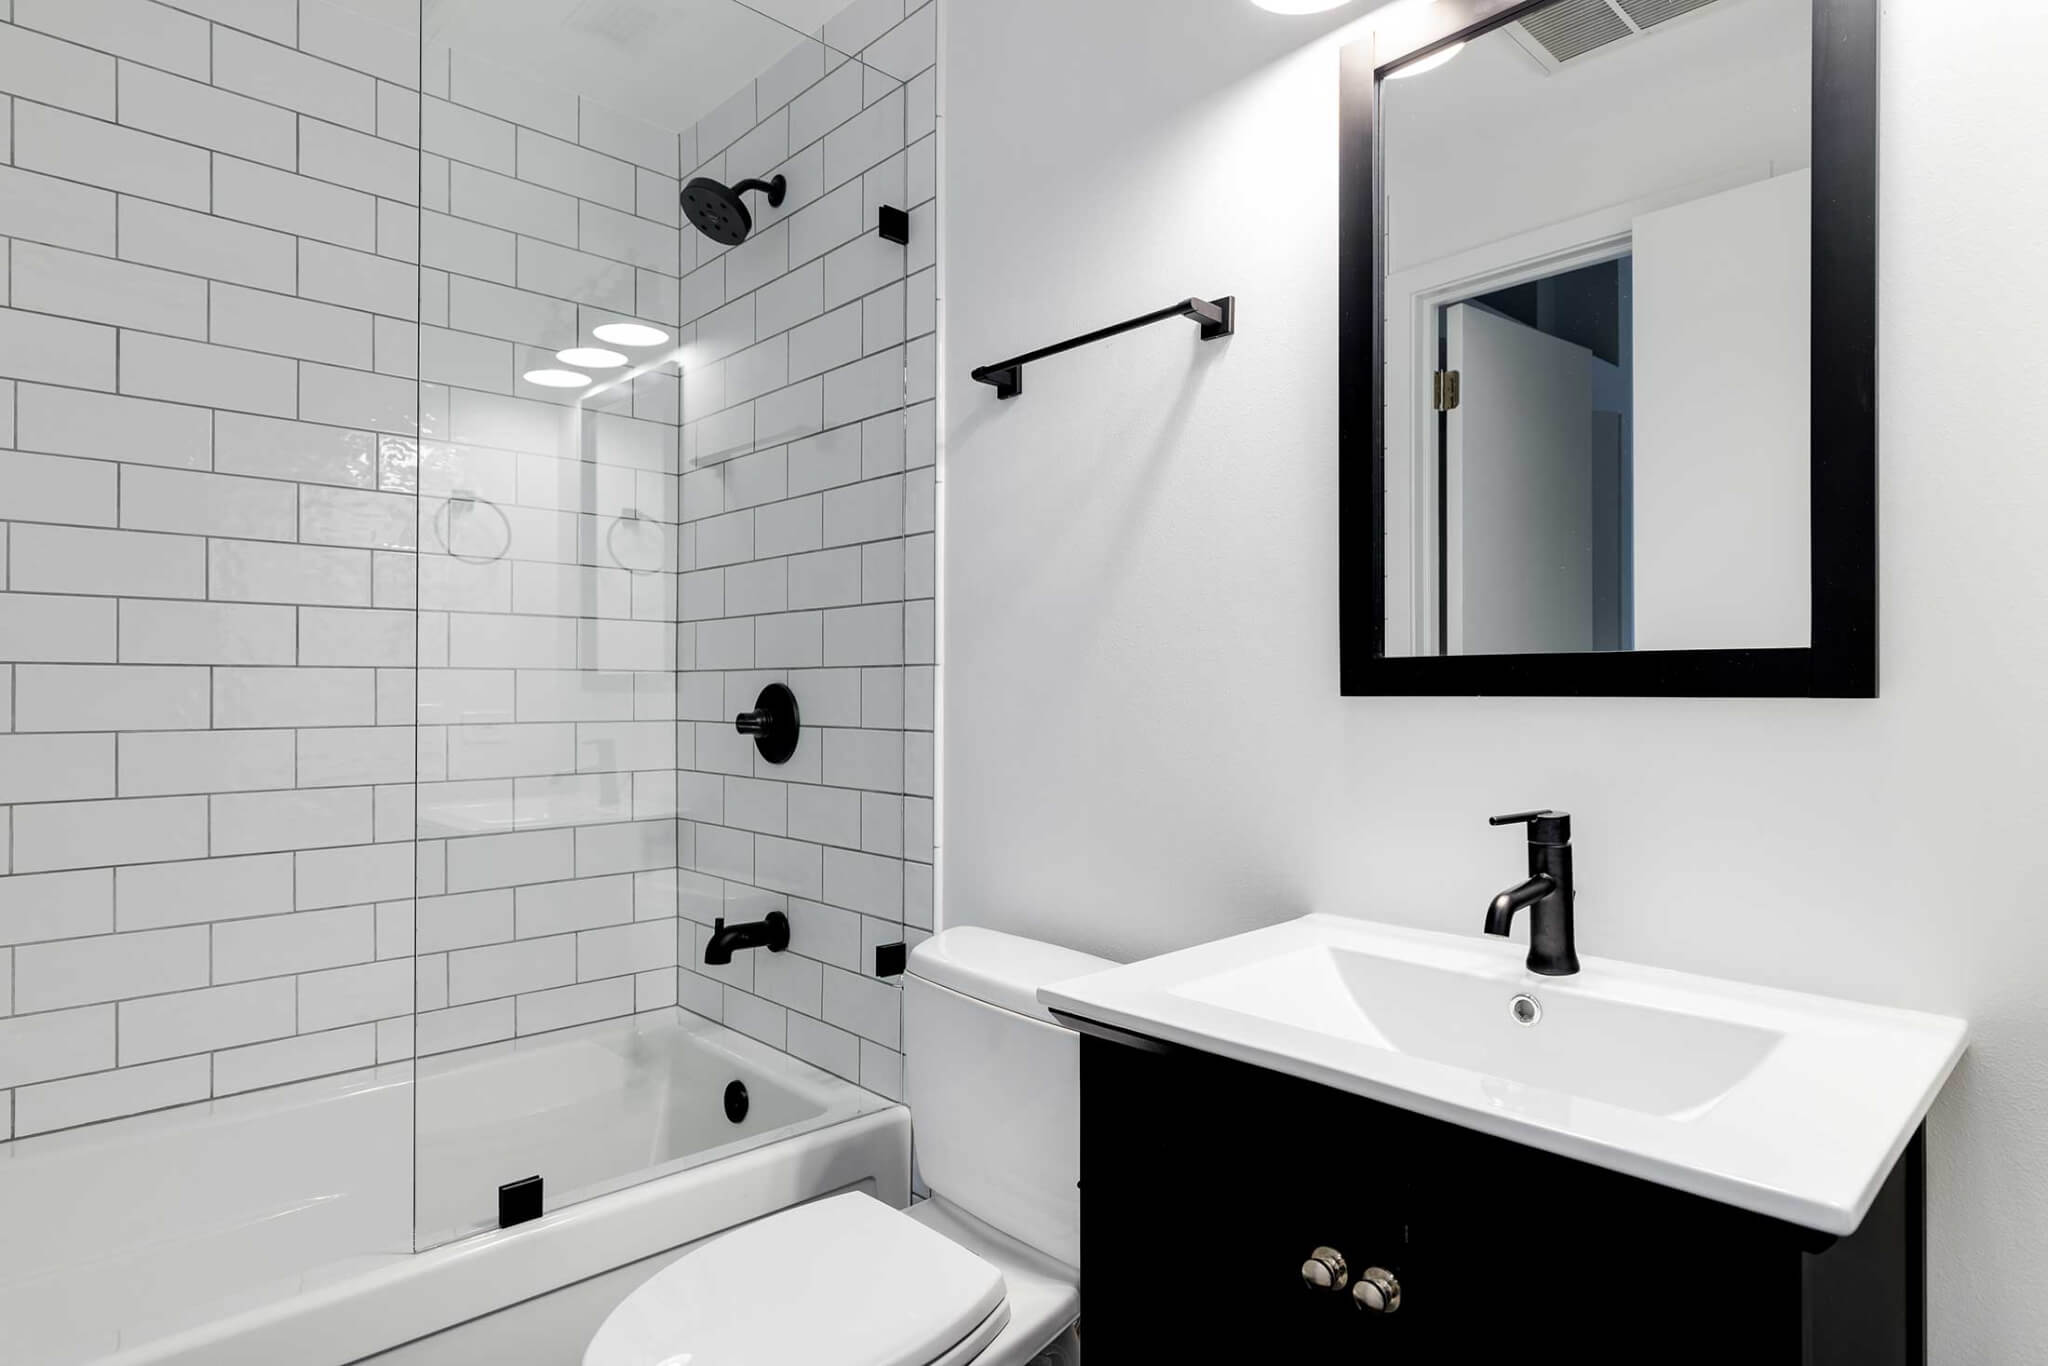 glass shower door in white and black themed bathroom